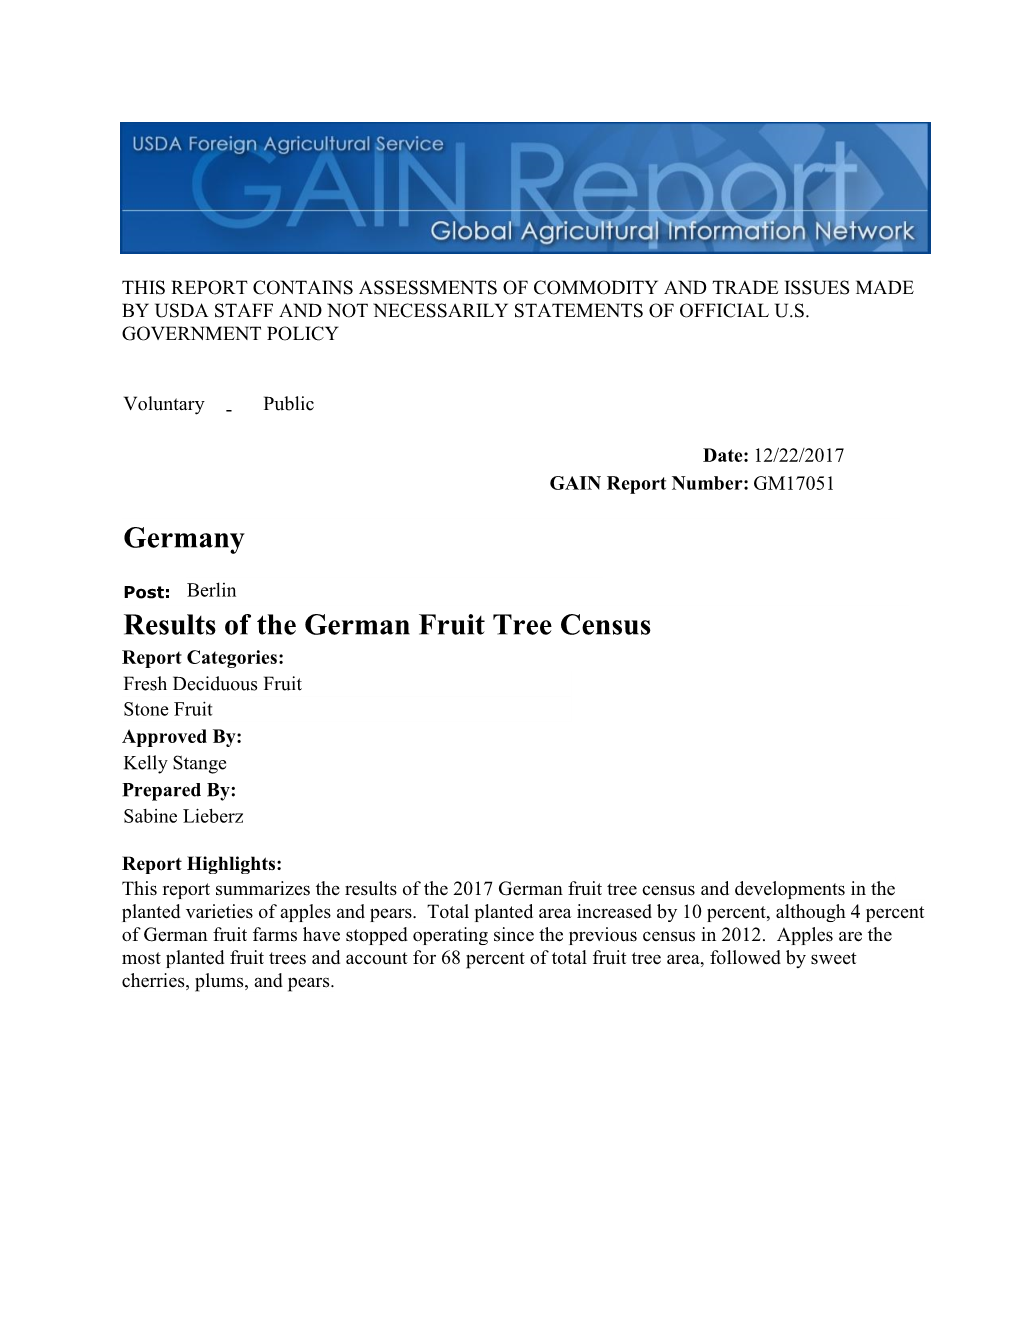 Germany: Results of the German Fruit Tree Census